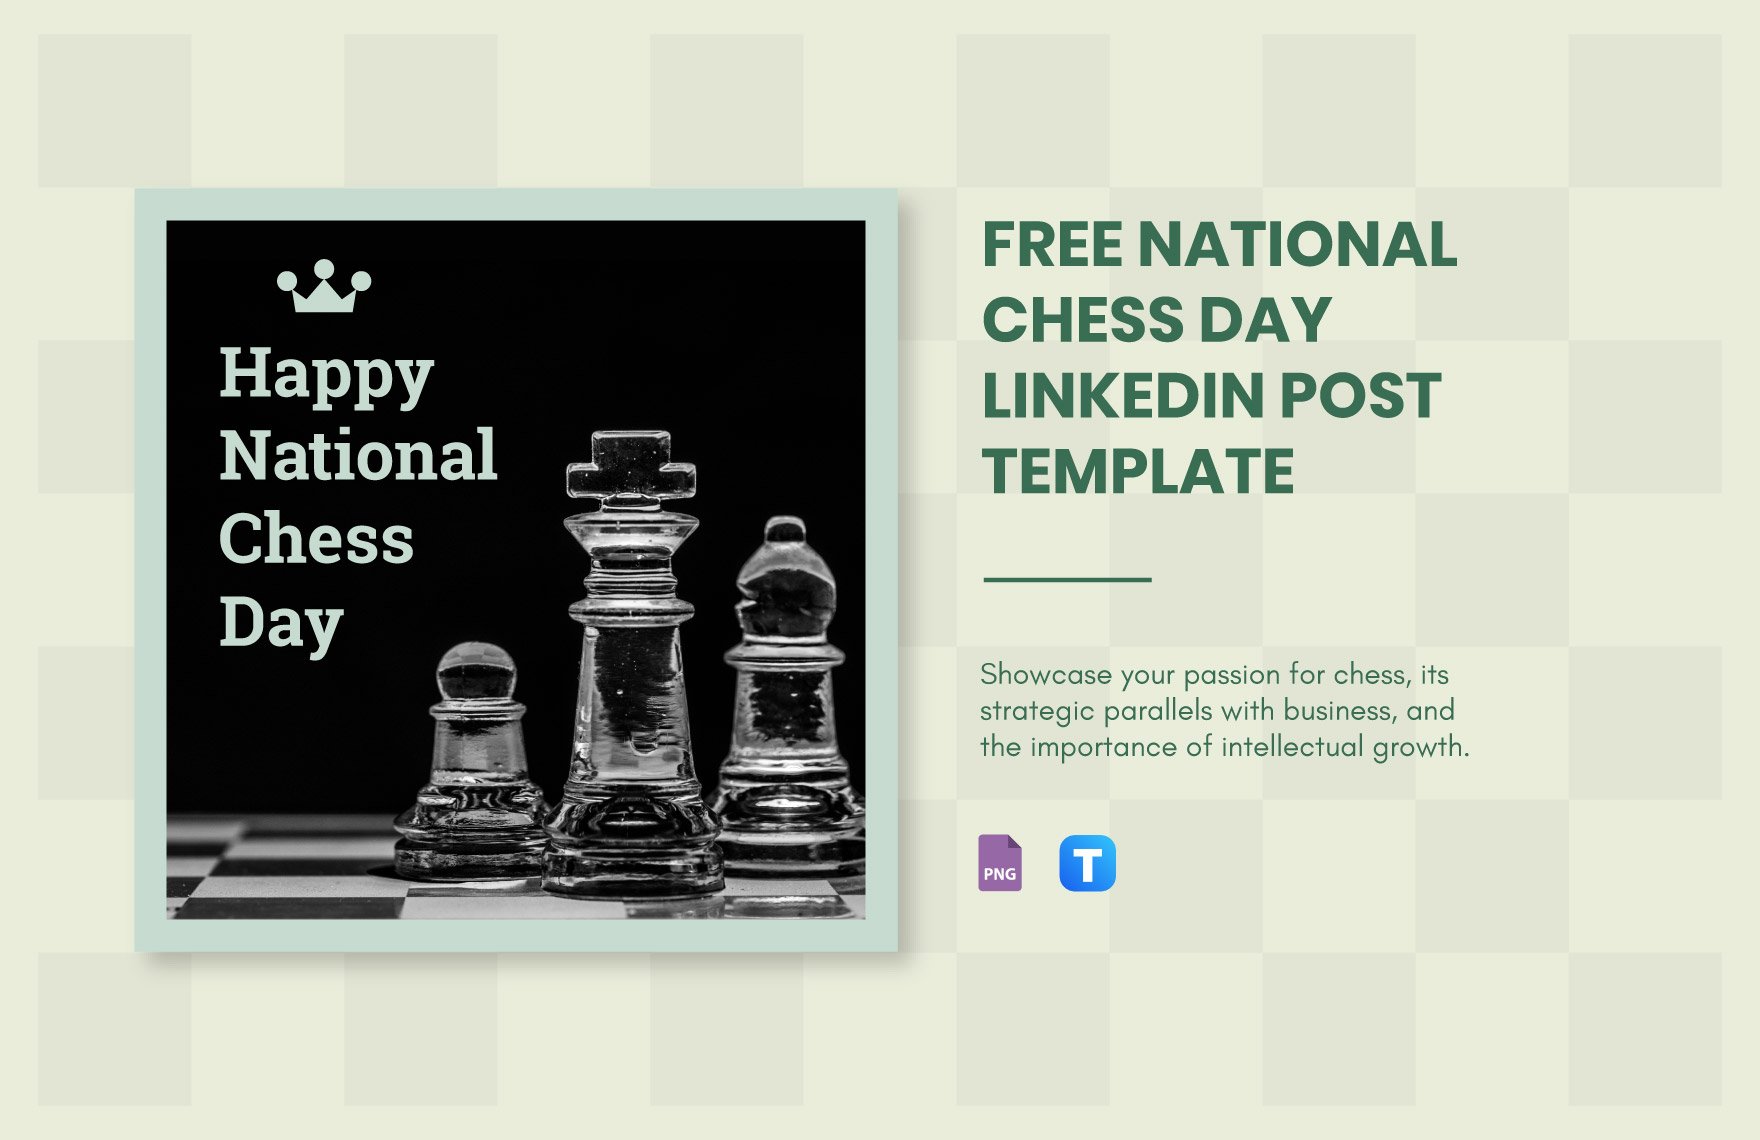 Free National Chess Day LinkedIn Post Template in PNG